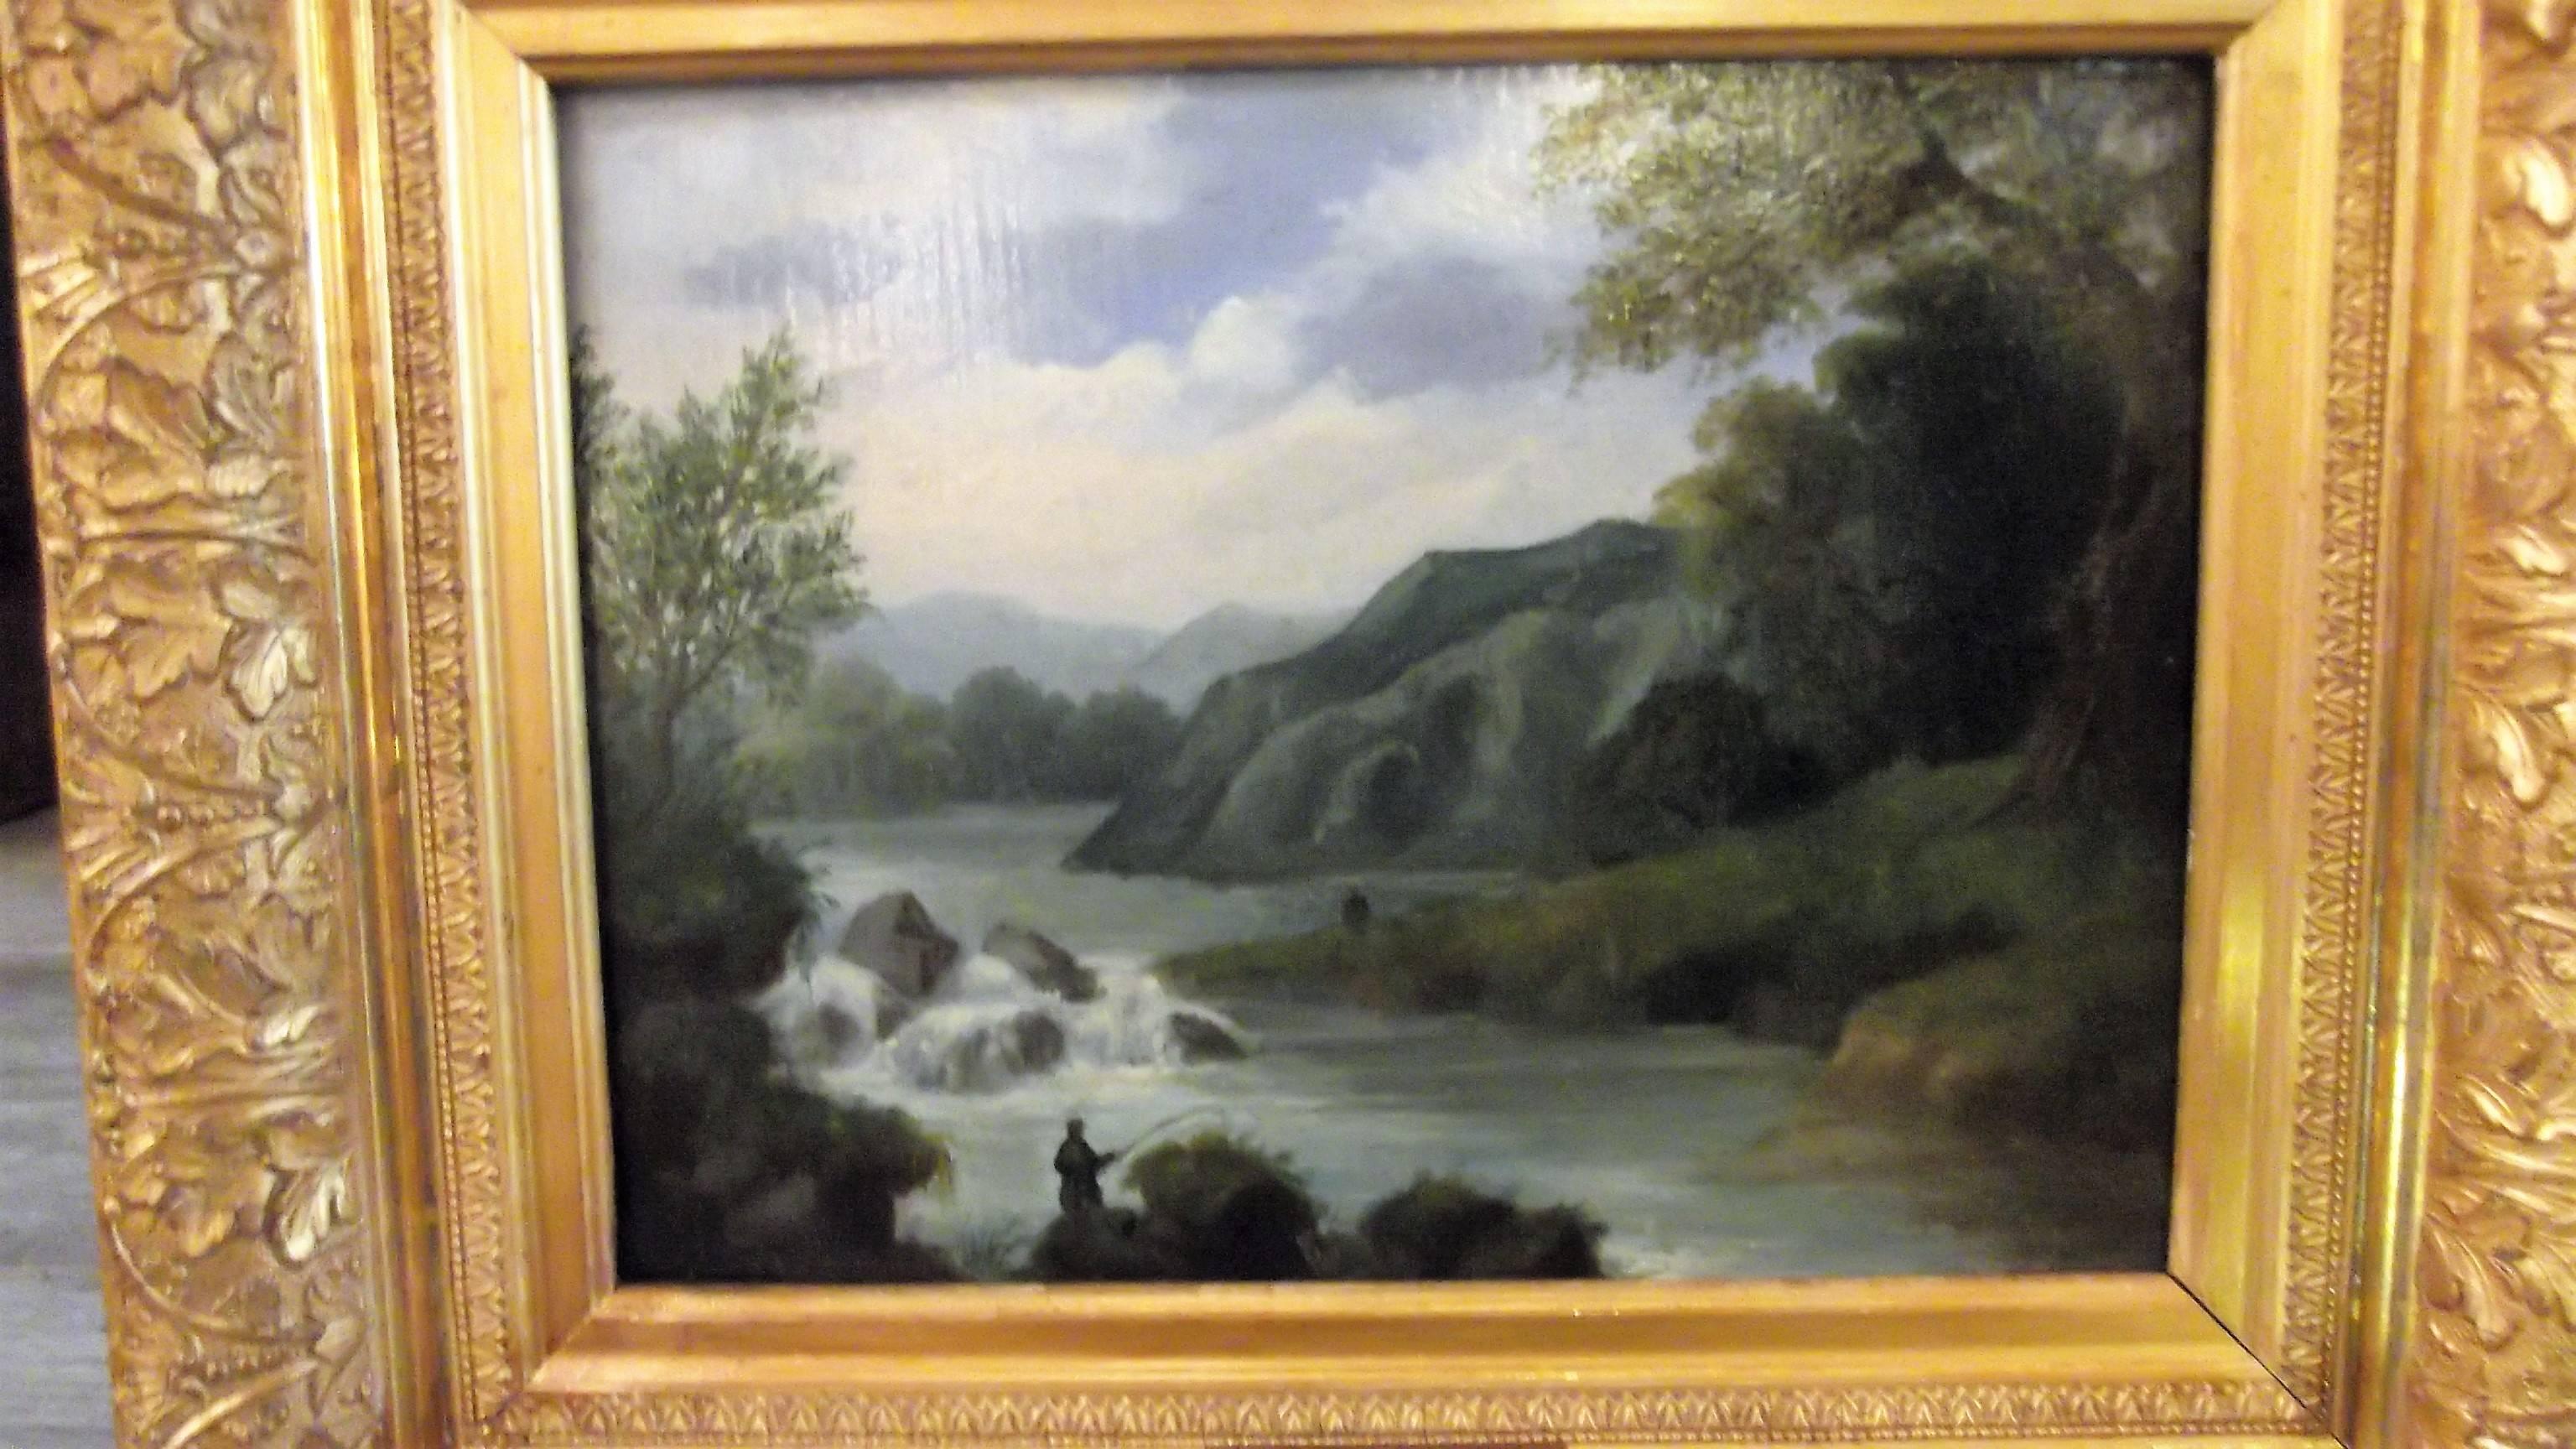 Early to mid-19th century English oil on board by artist James Stark (1794-1859) Early frame, 